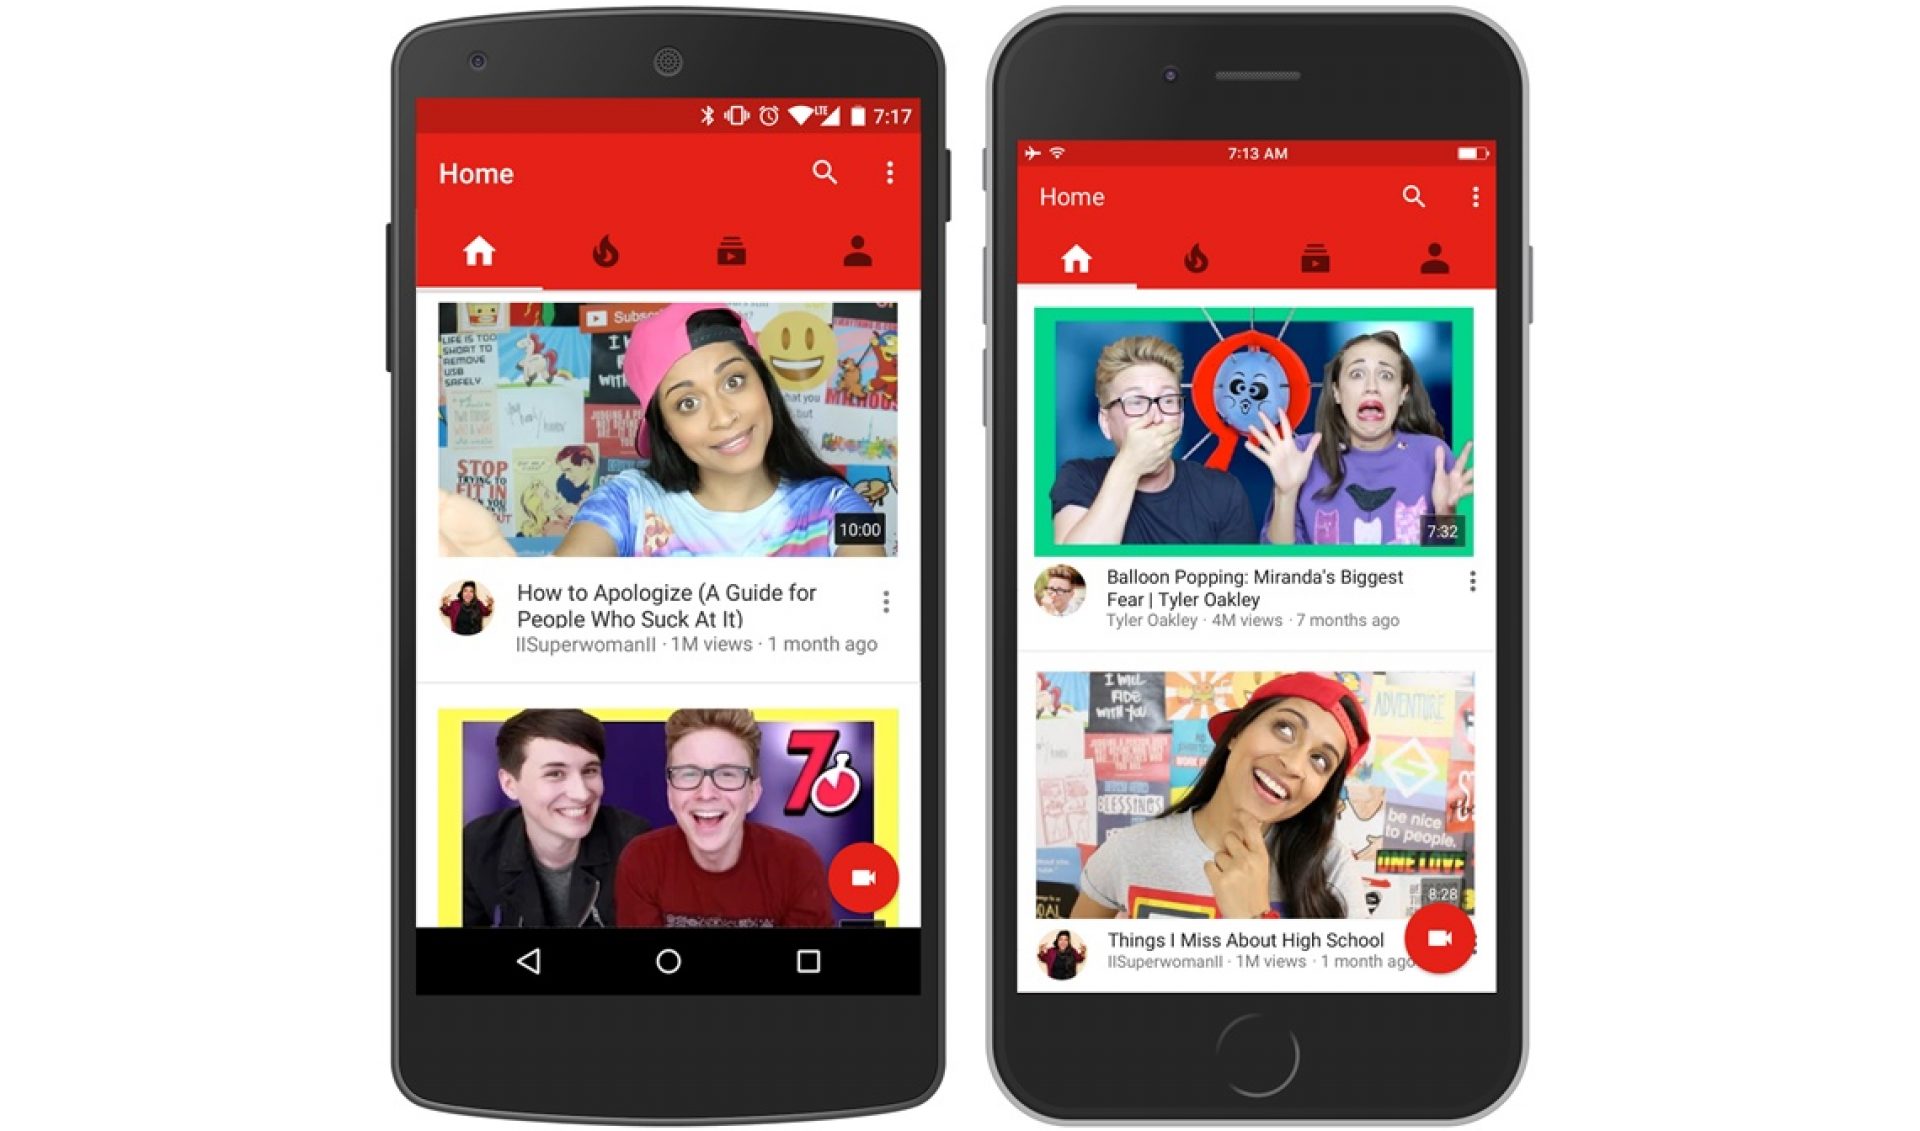 YouTube Redesigns Mobile Homepage With Big Images, Recommendations